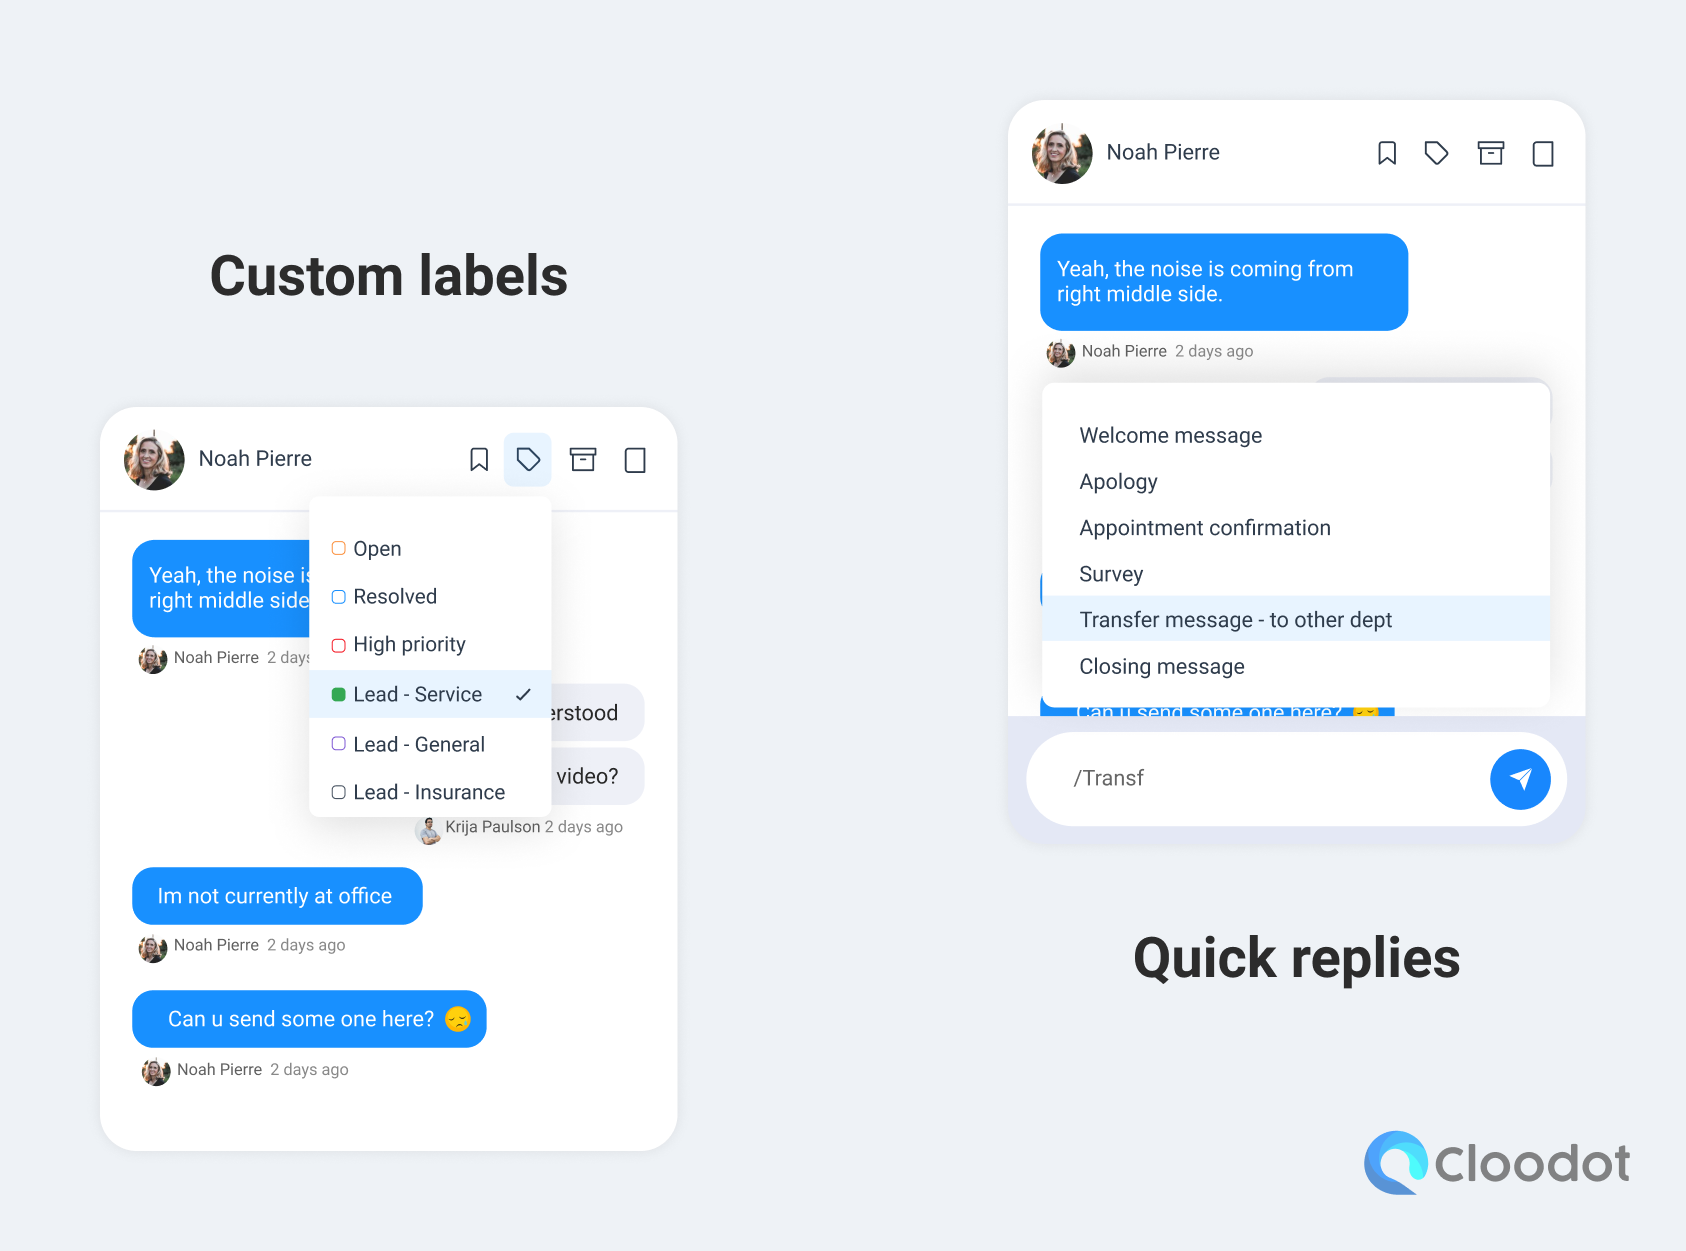 Add custom labels on chats. Save custom quick replies for faster replies.